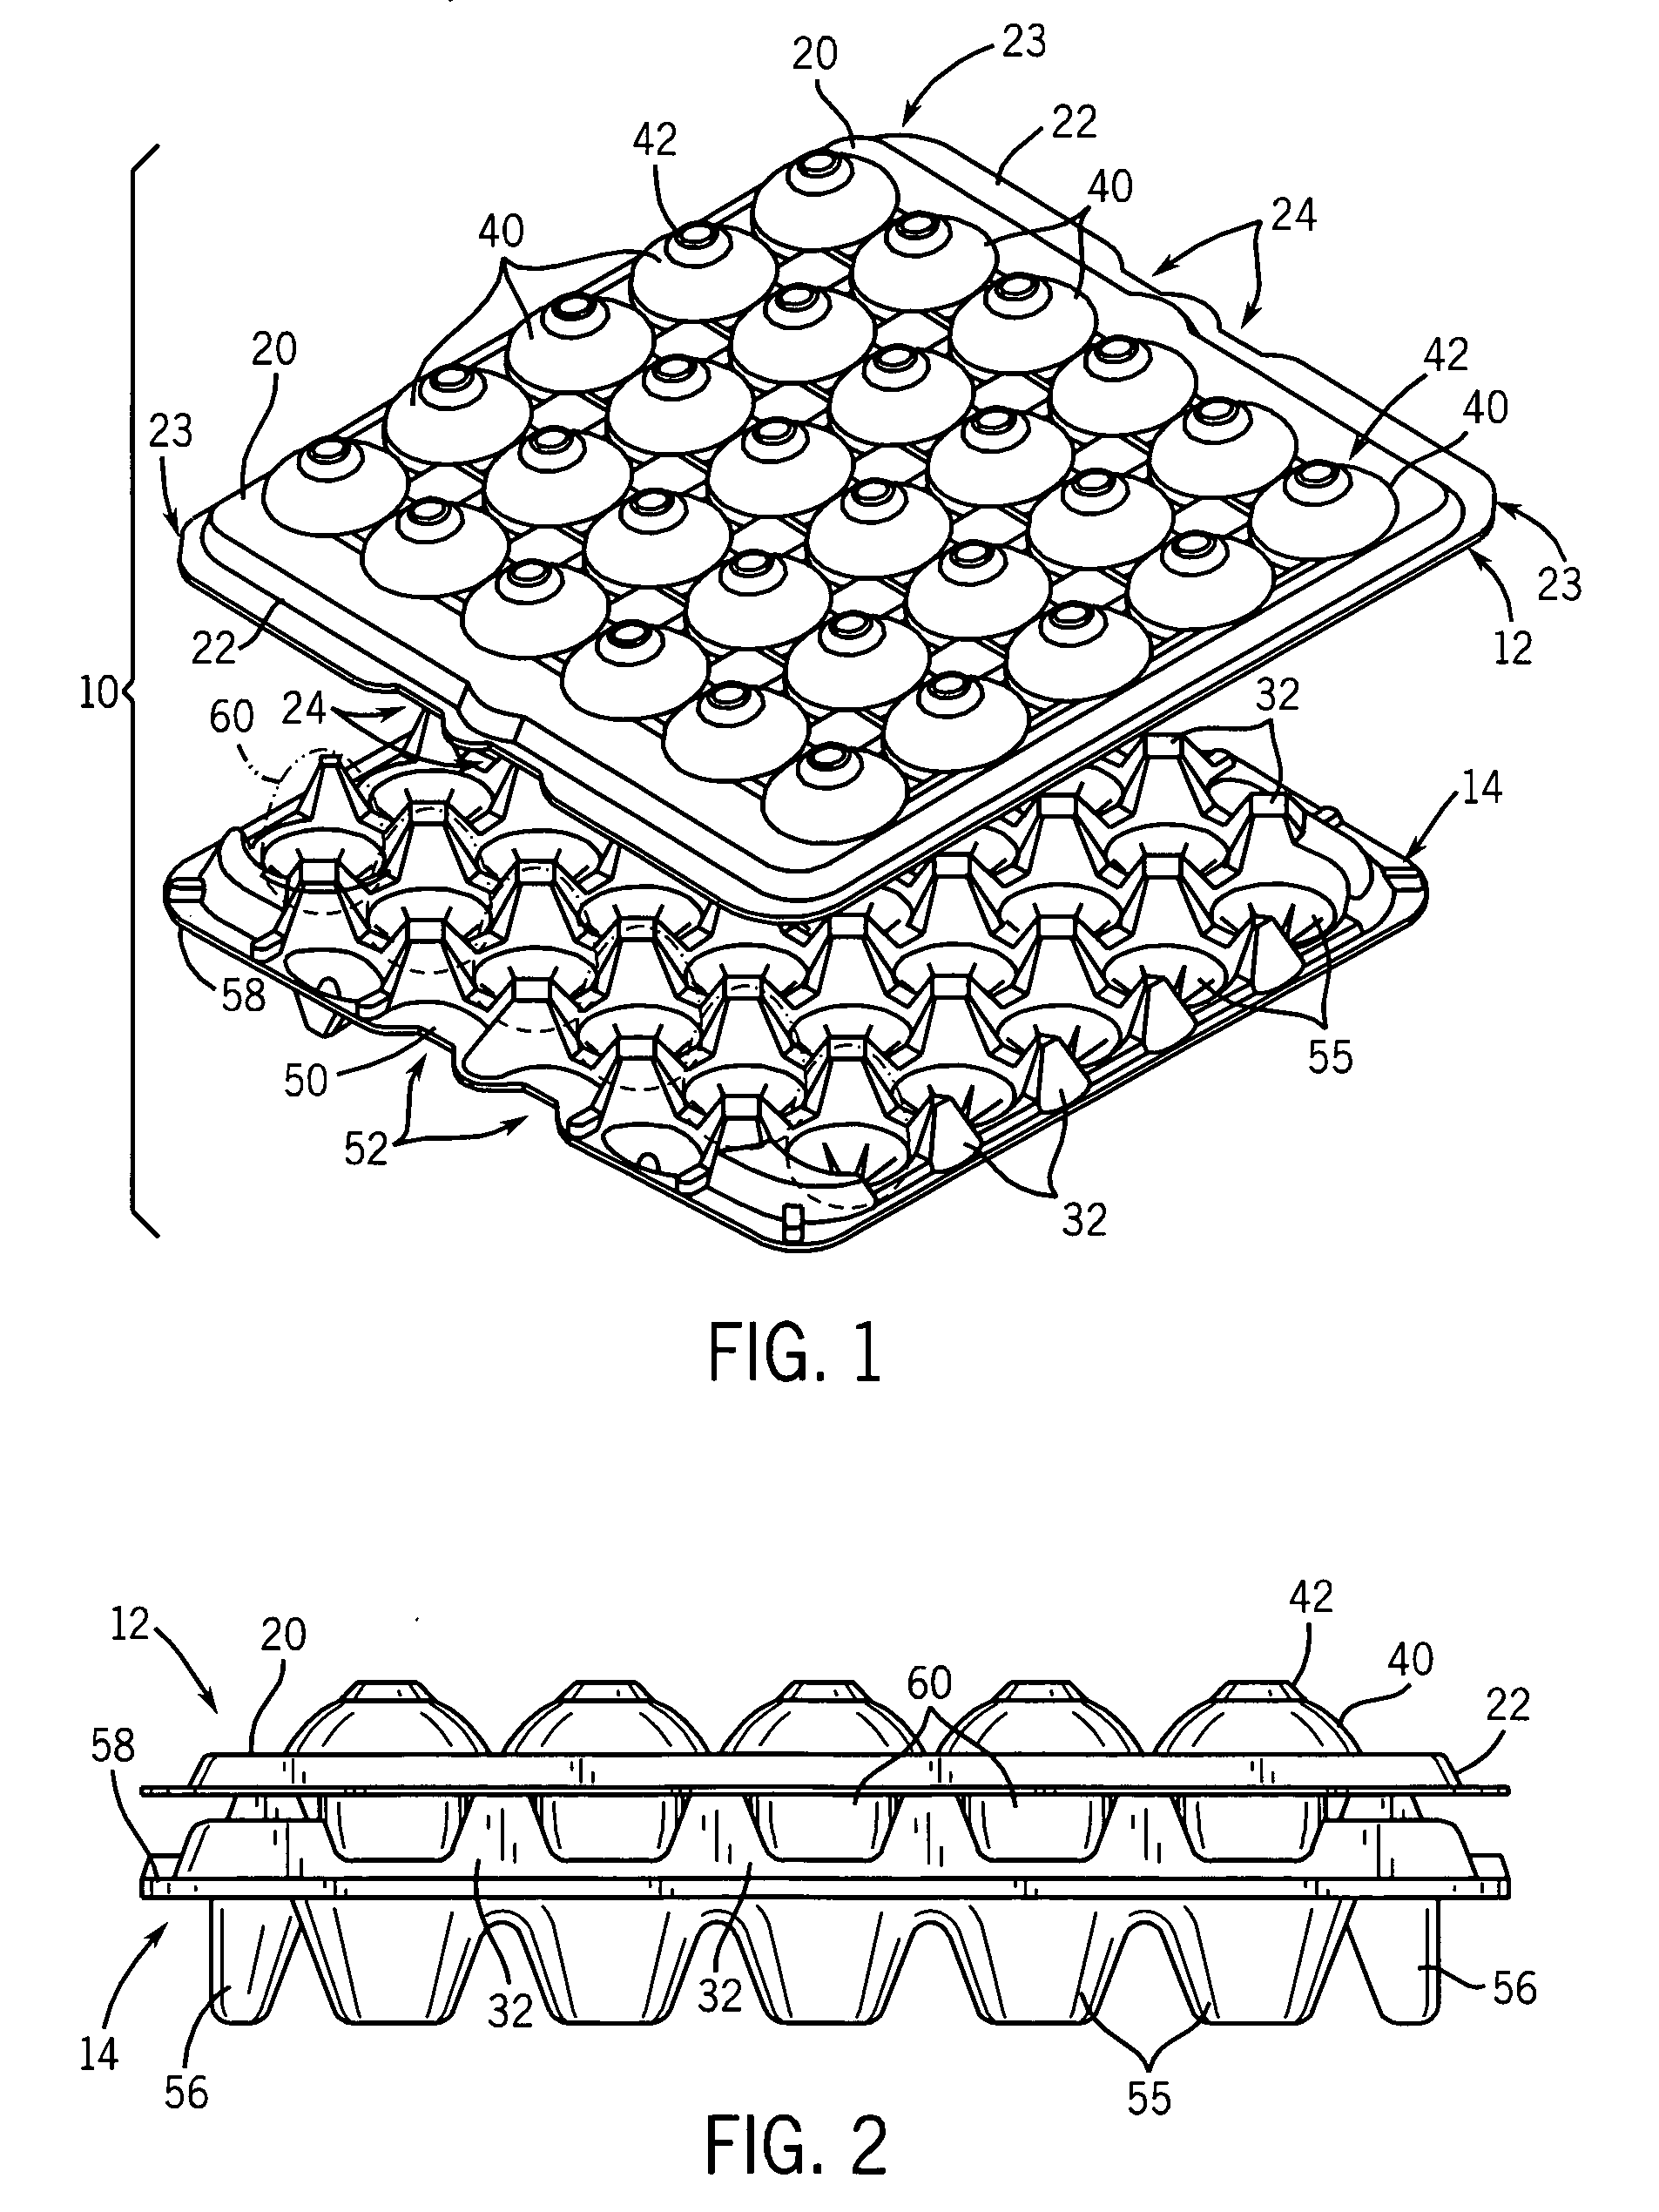 Nestable lid for packaging systems